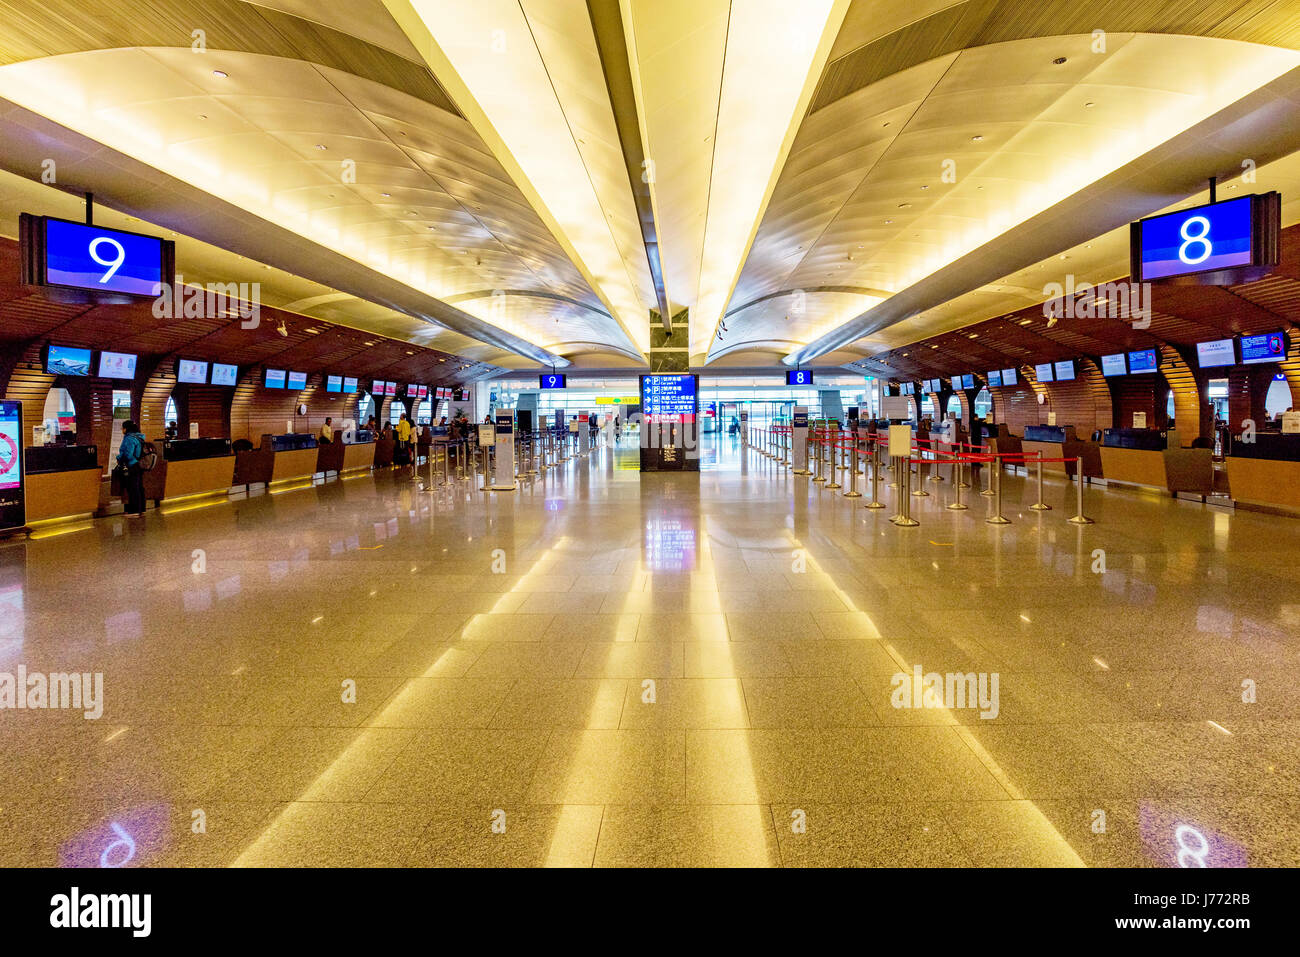 TAOYUAN, TAIWAN - APRIL 24TH: Taoyuan airport check in desk area where passenger come to check-in their luggage and receive their tickets on April 24, Stock Photo